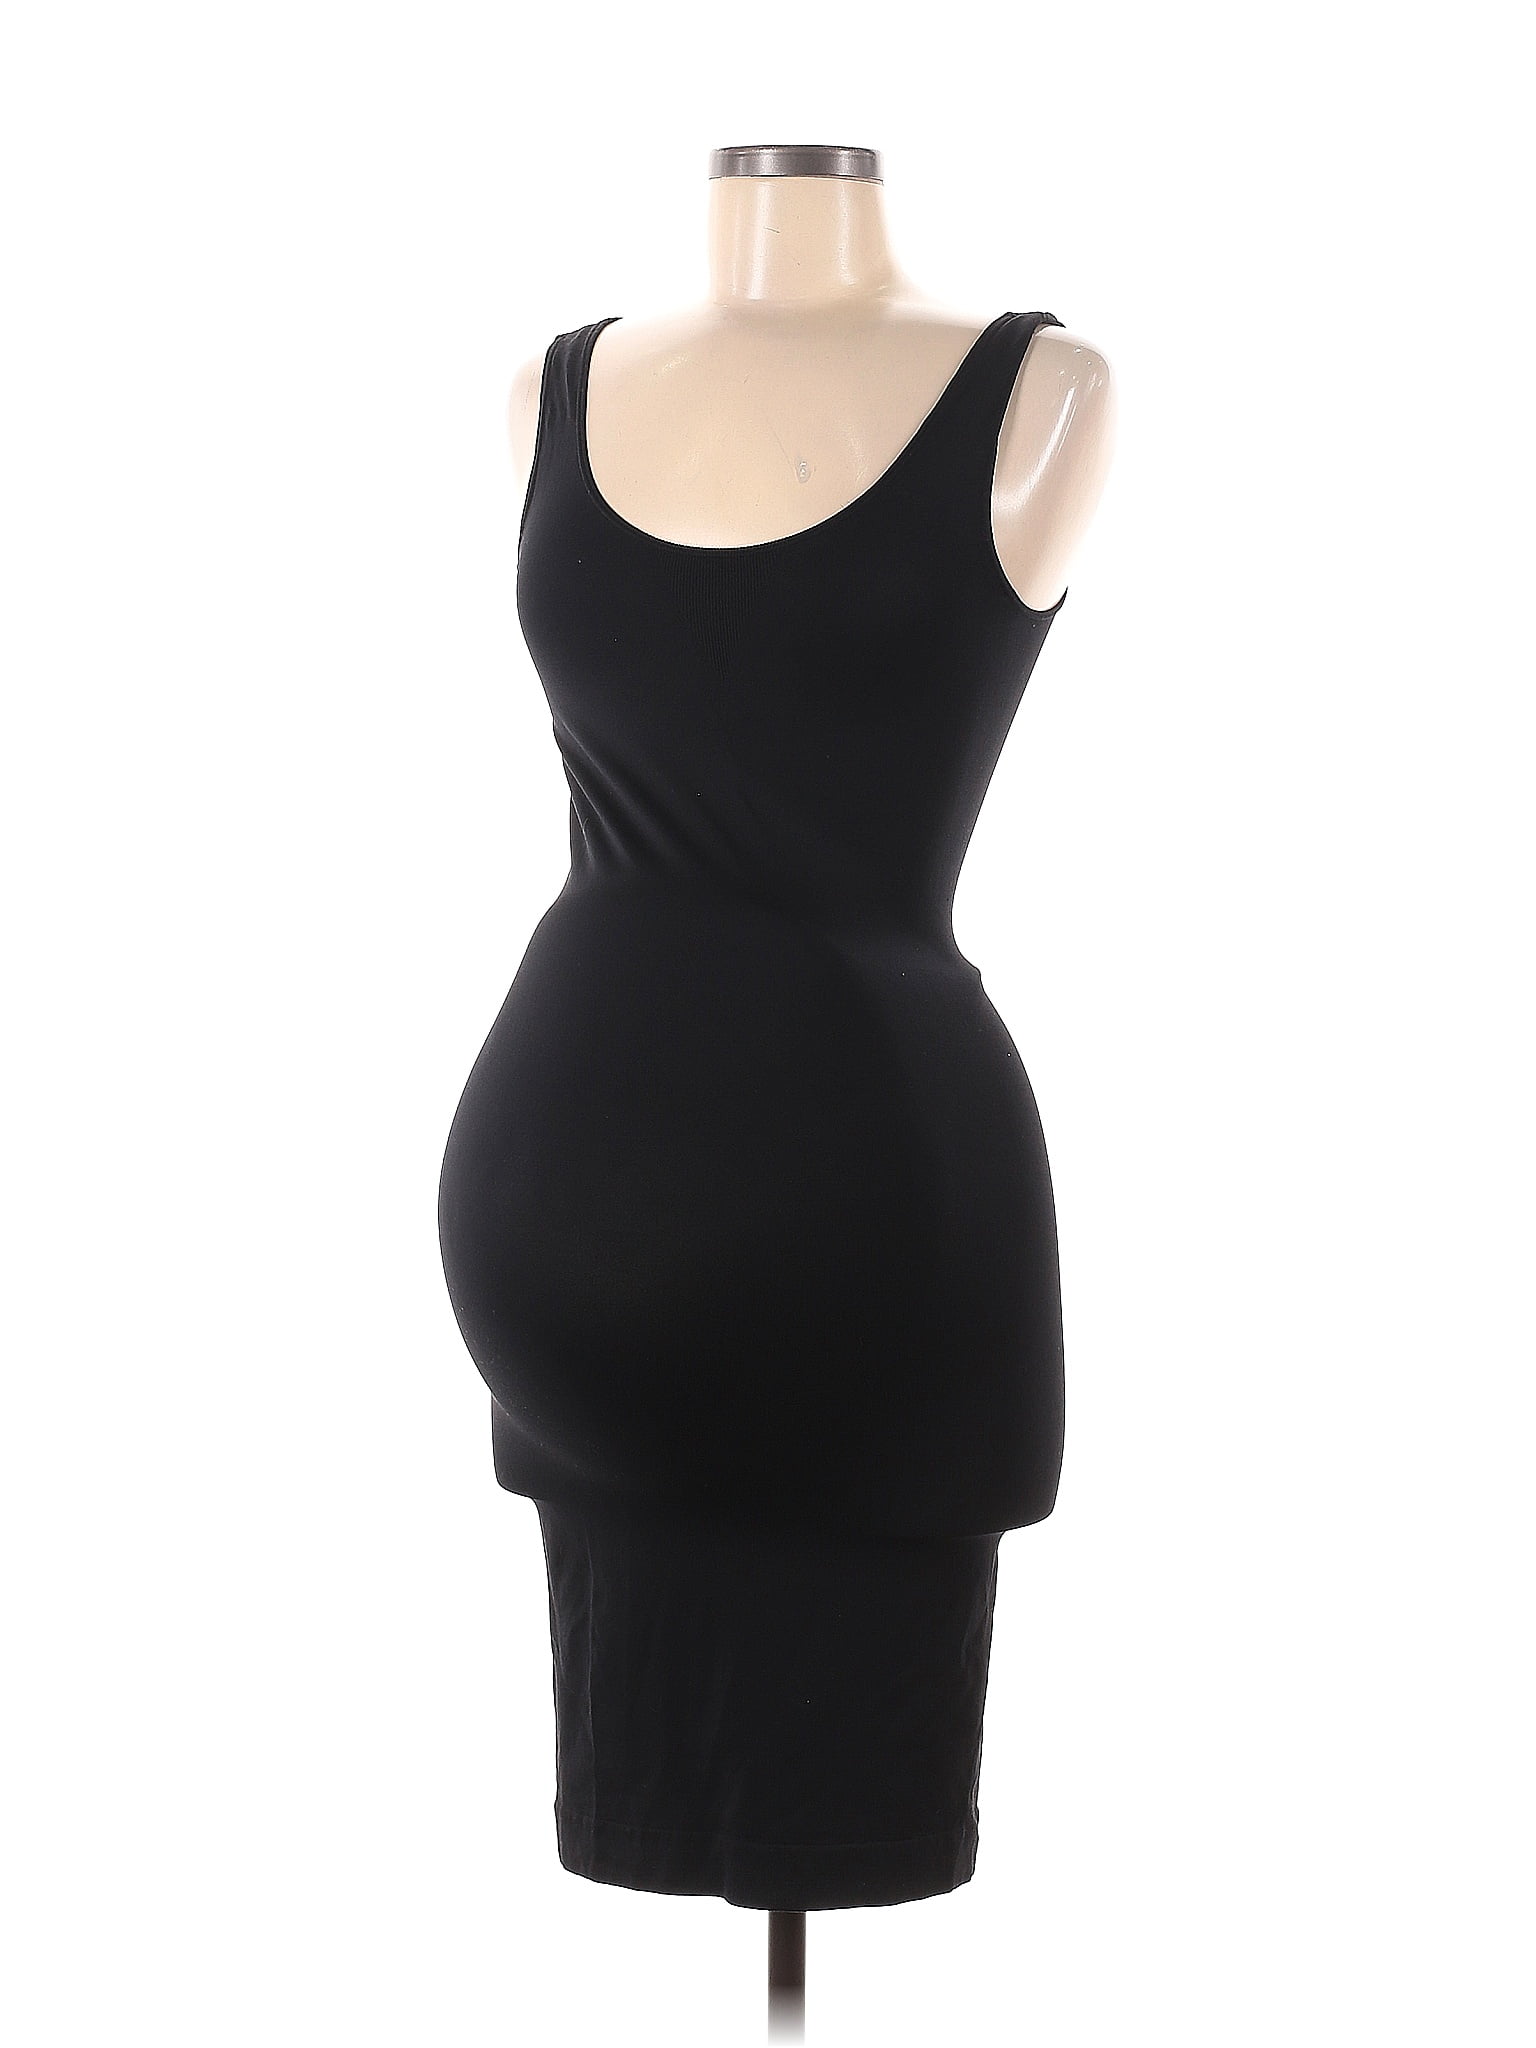 Topshop Maternity Maternity Clothing On Sale Up To 90% Off Retail